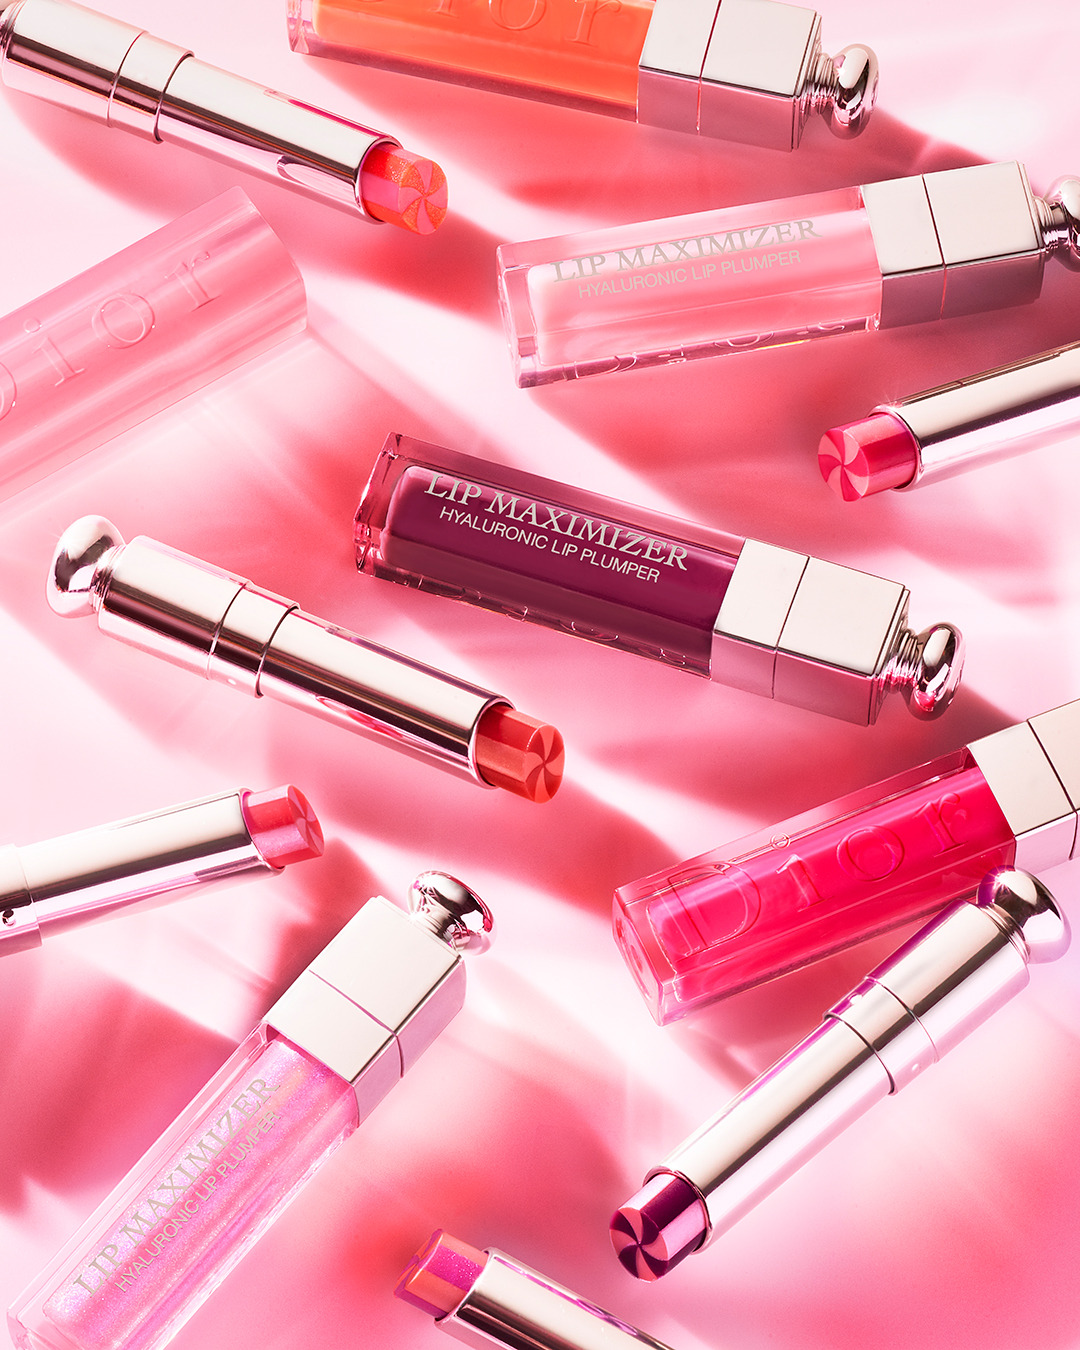 Dior’s done it again Meet @DiorMakeup’s new Lip Glow To The Max and Dior Addict Lip Maxi